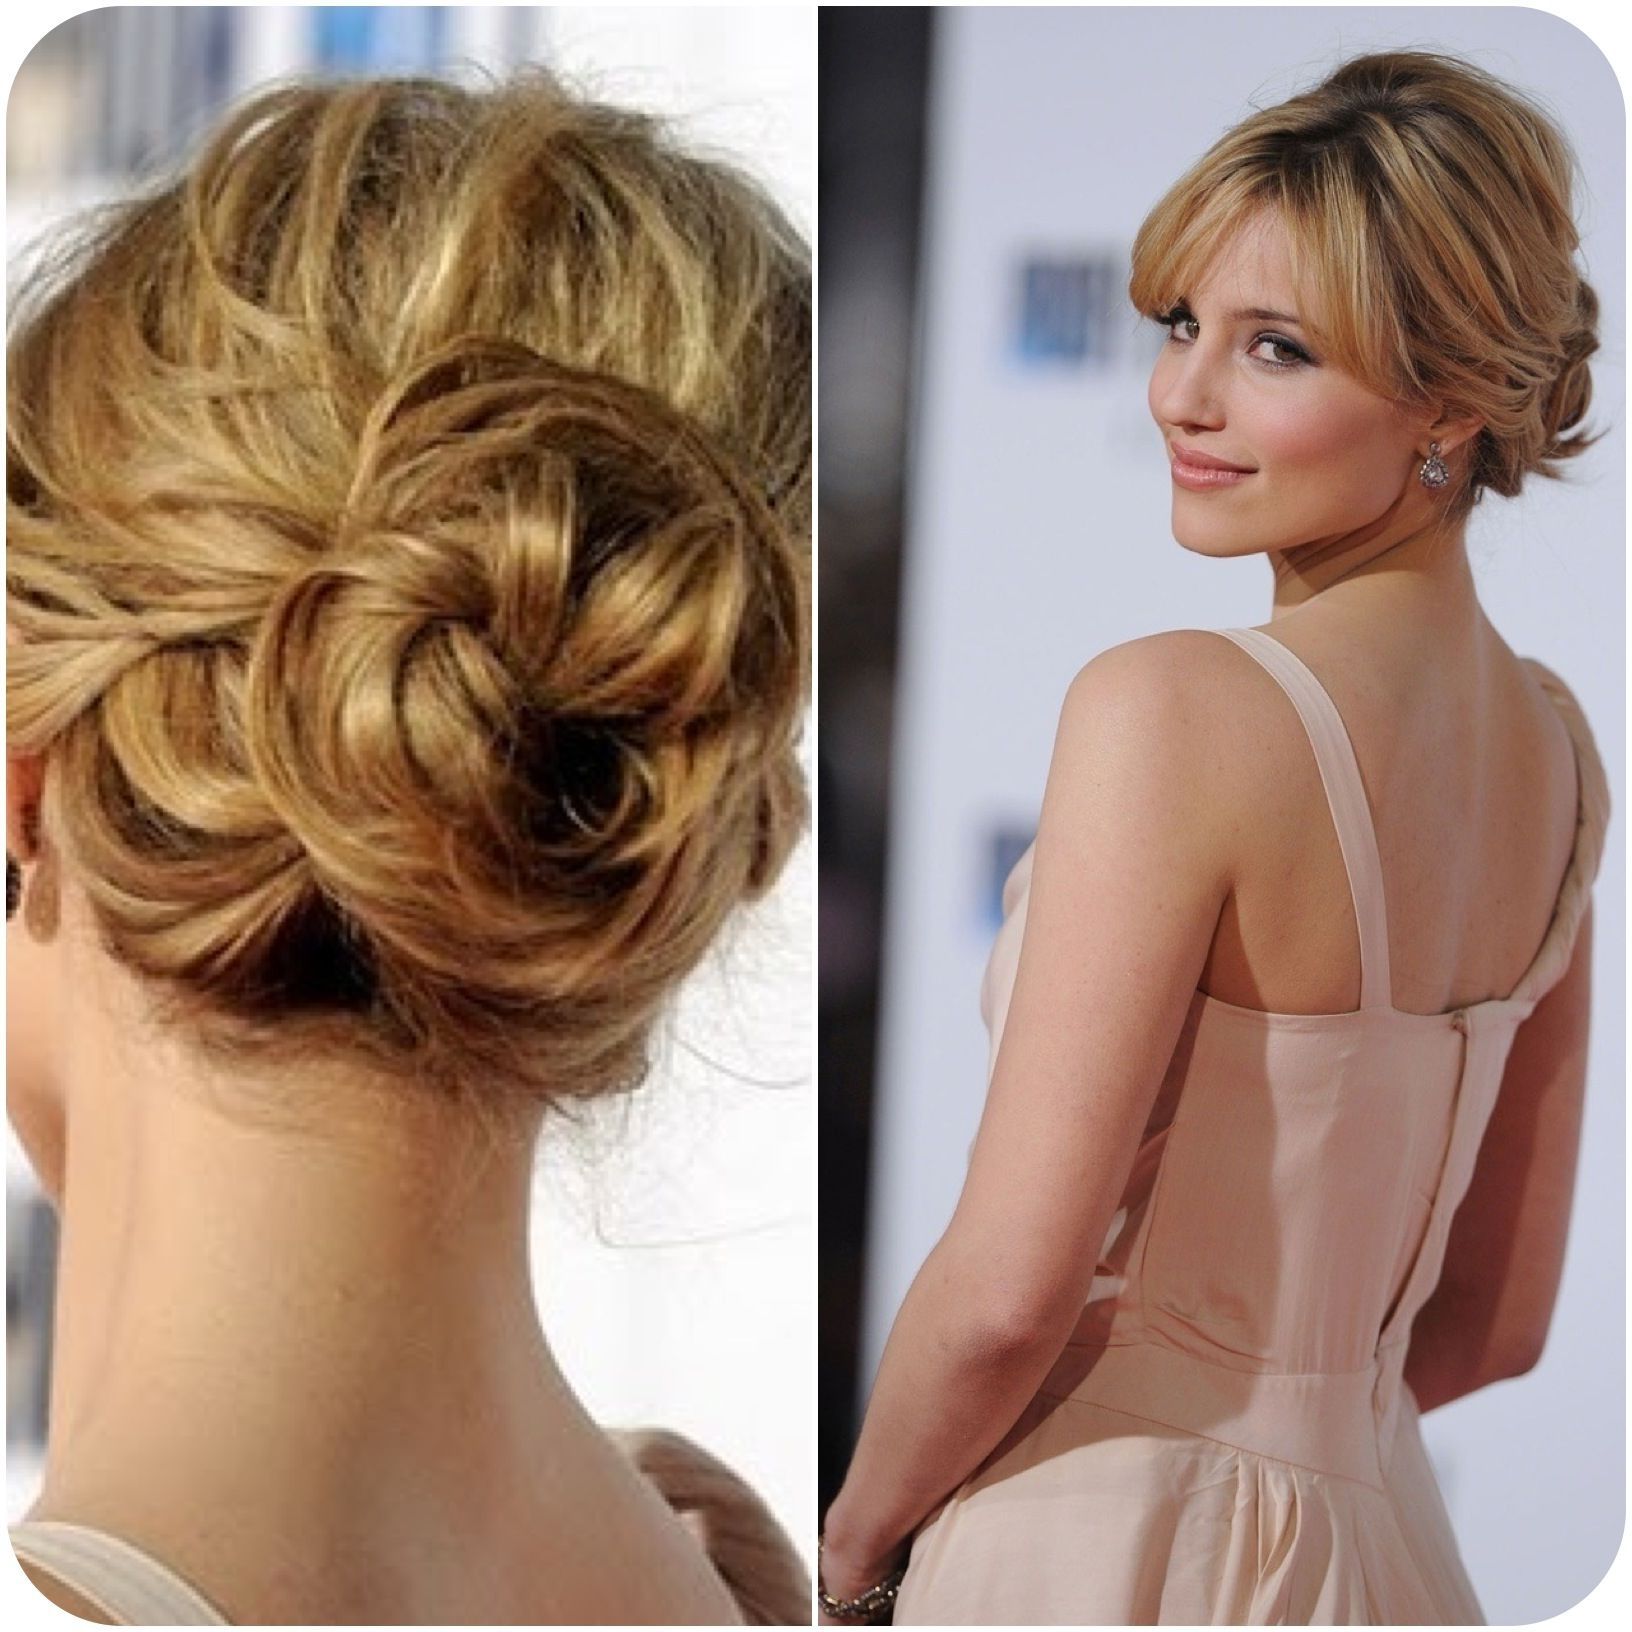 Dianna Agron Romantic Updo With Bangs | Hair | Pinterest | Dianna Pertaining To Hairstyles For Bridesmaids Updos (View 12 of 15)